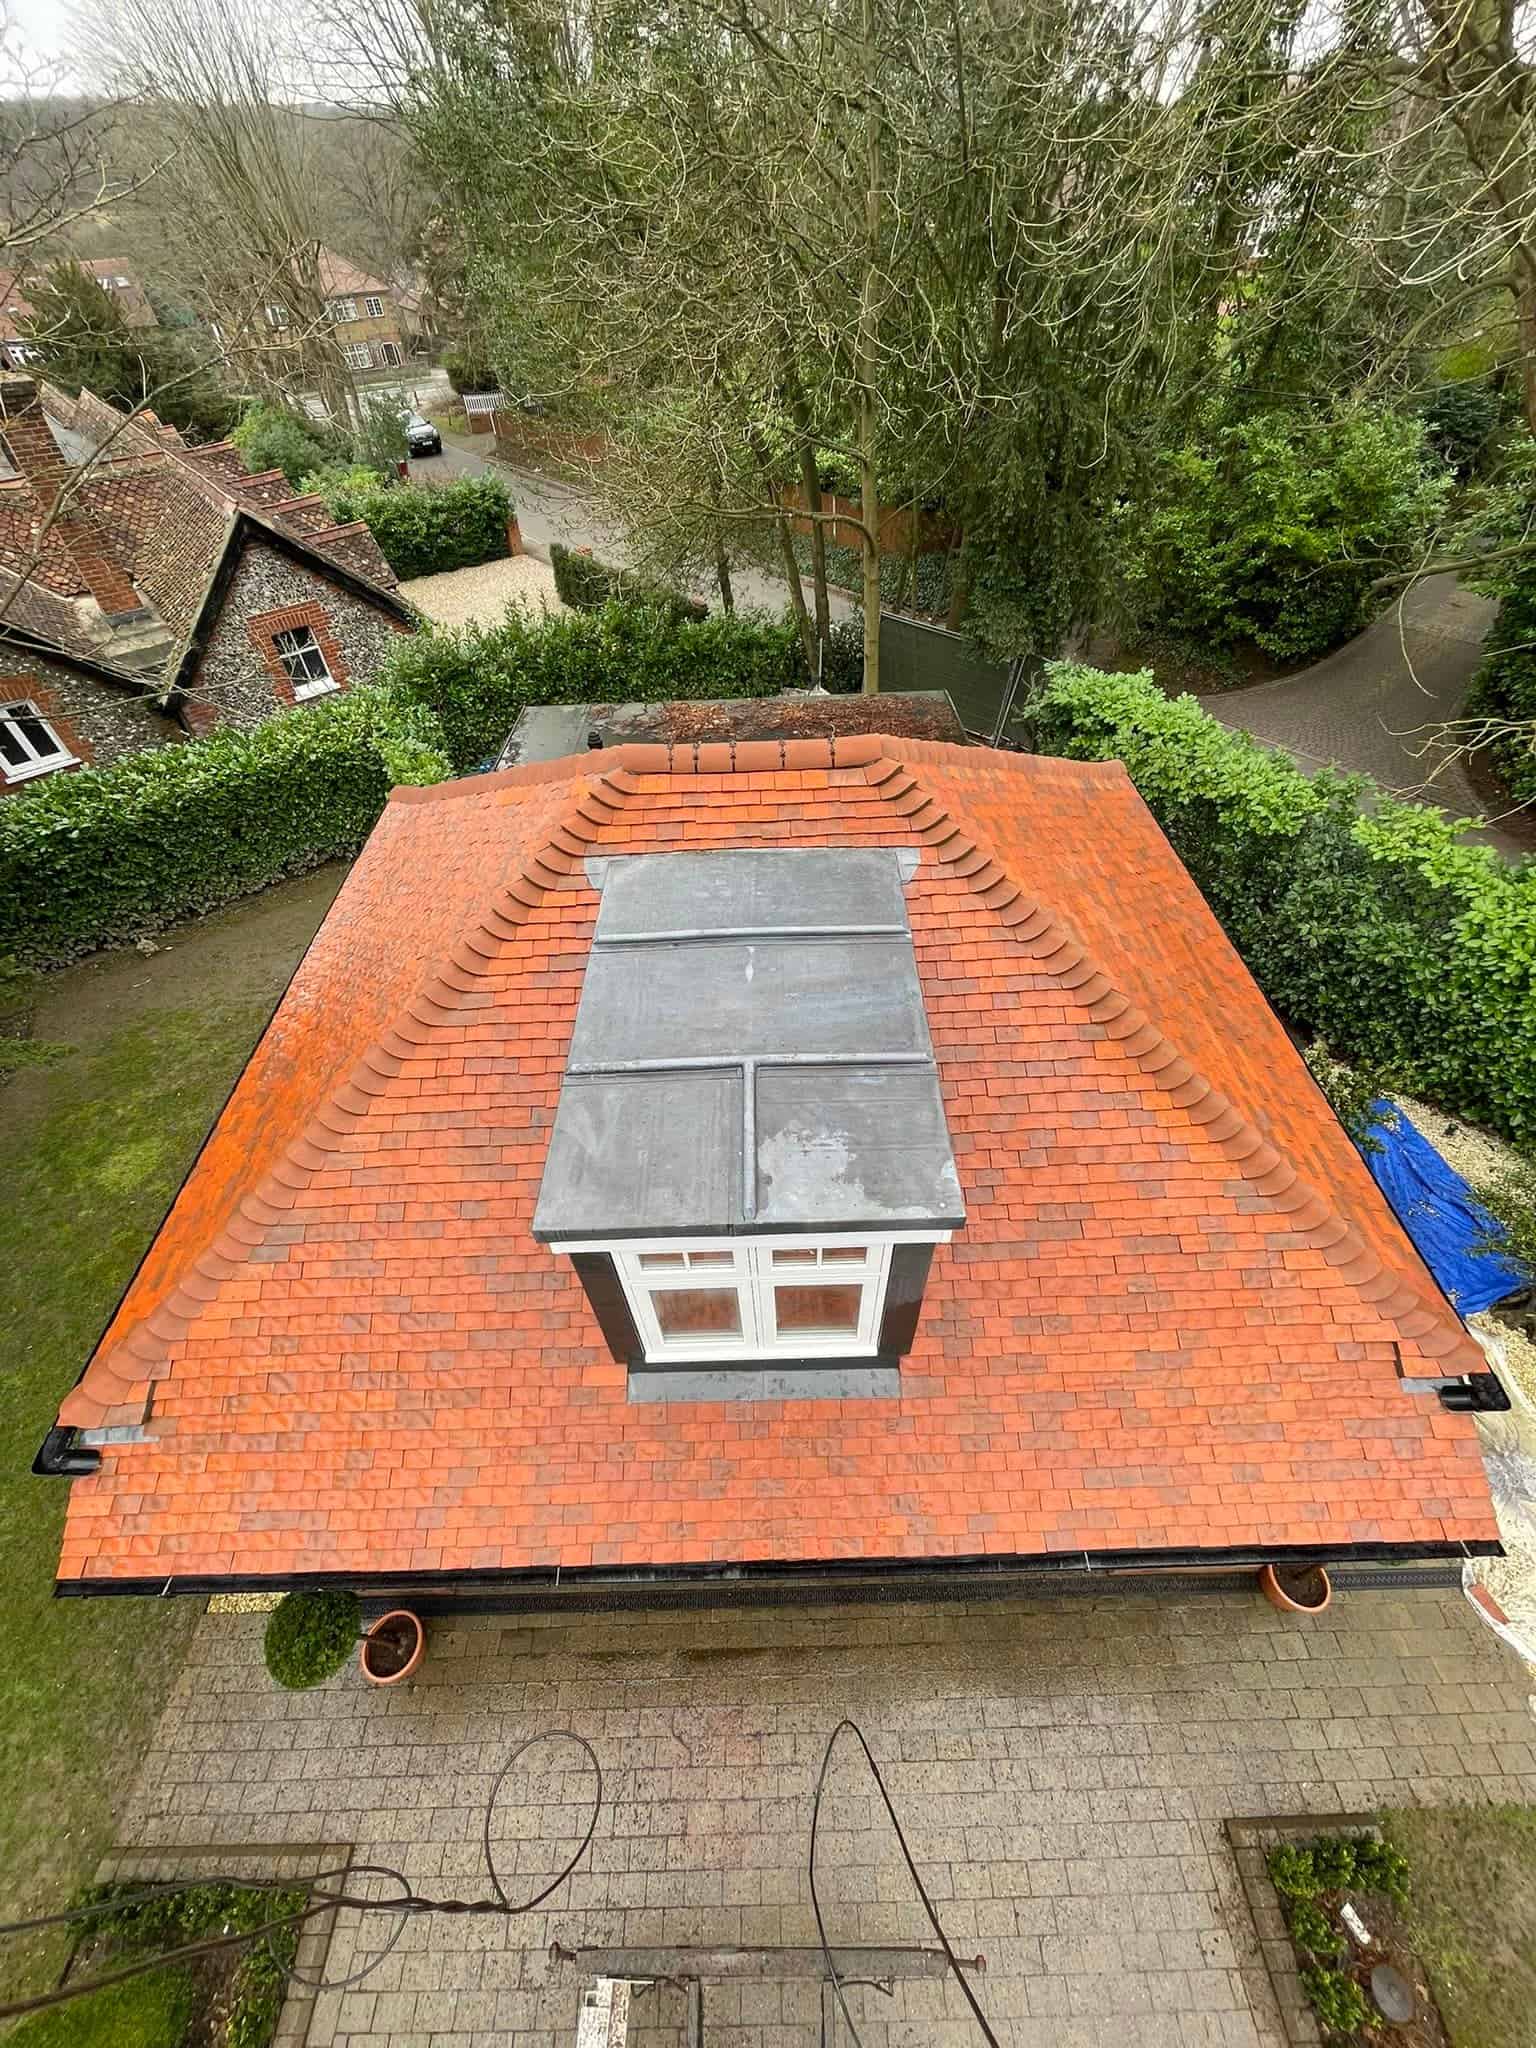 An aerial view of a roof being cleaned in London.